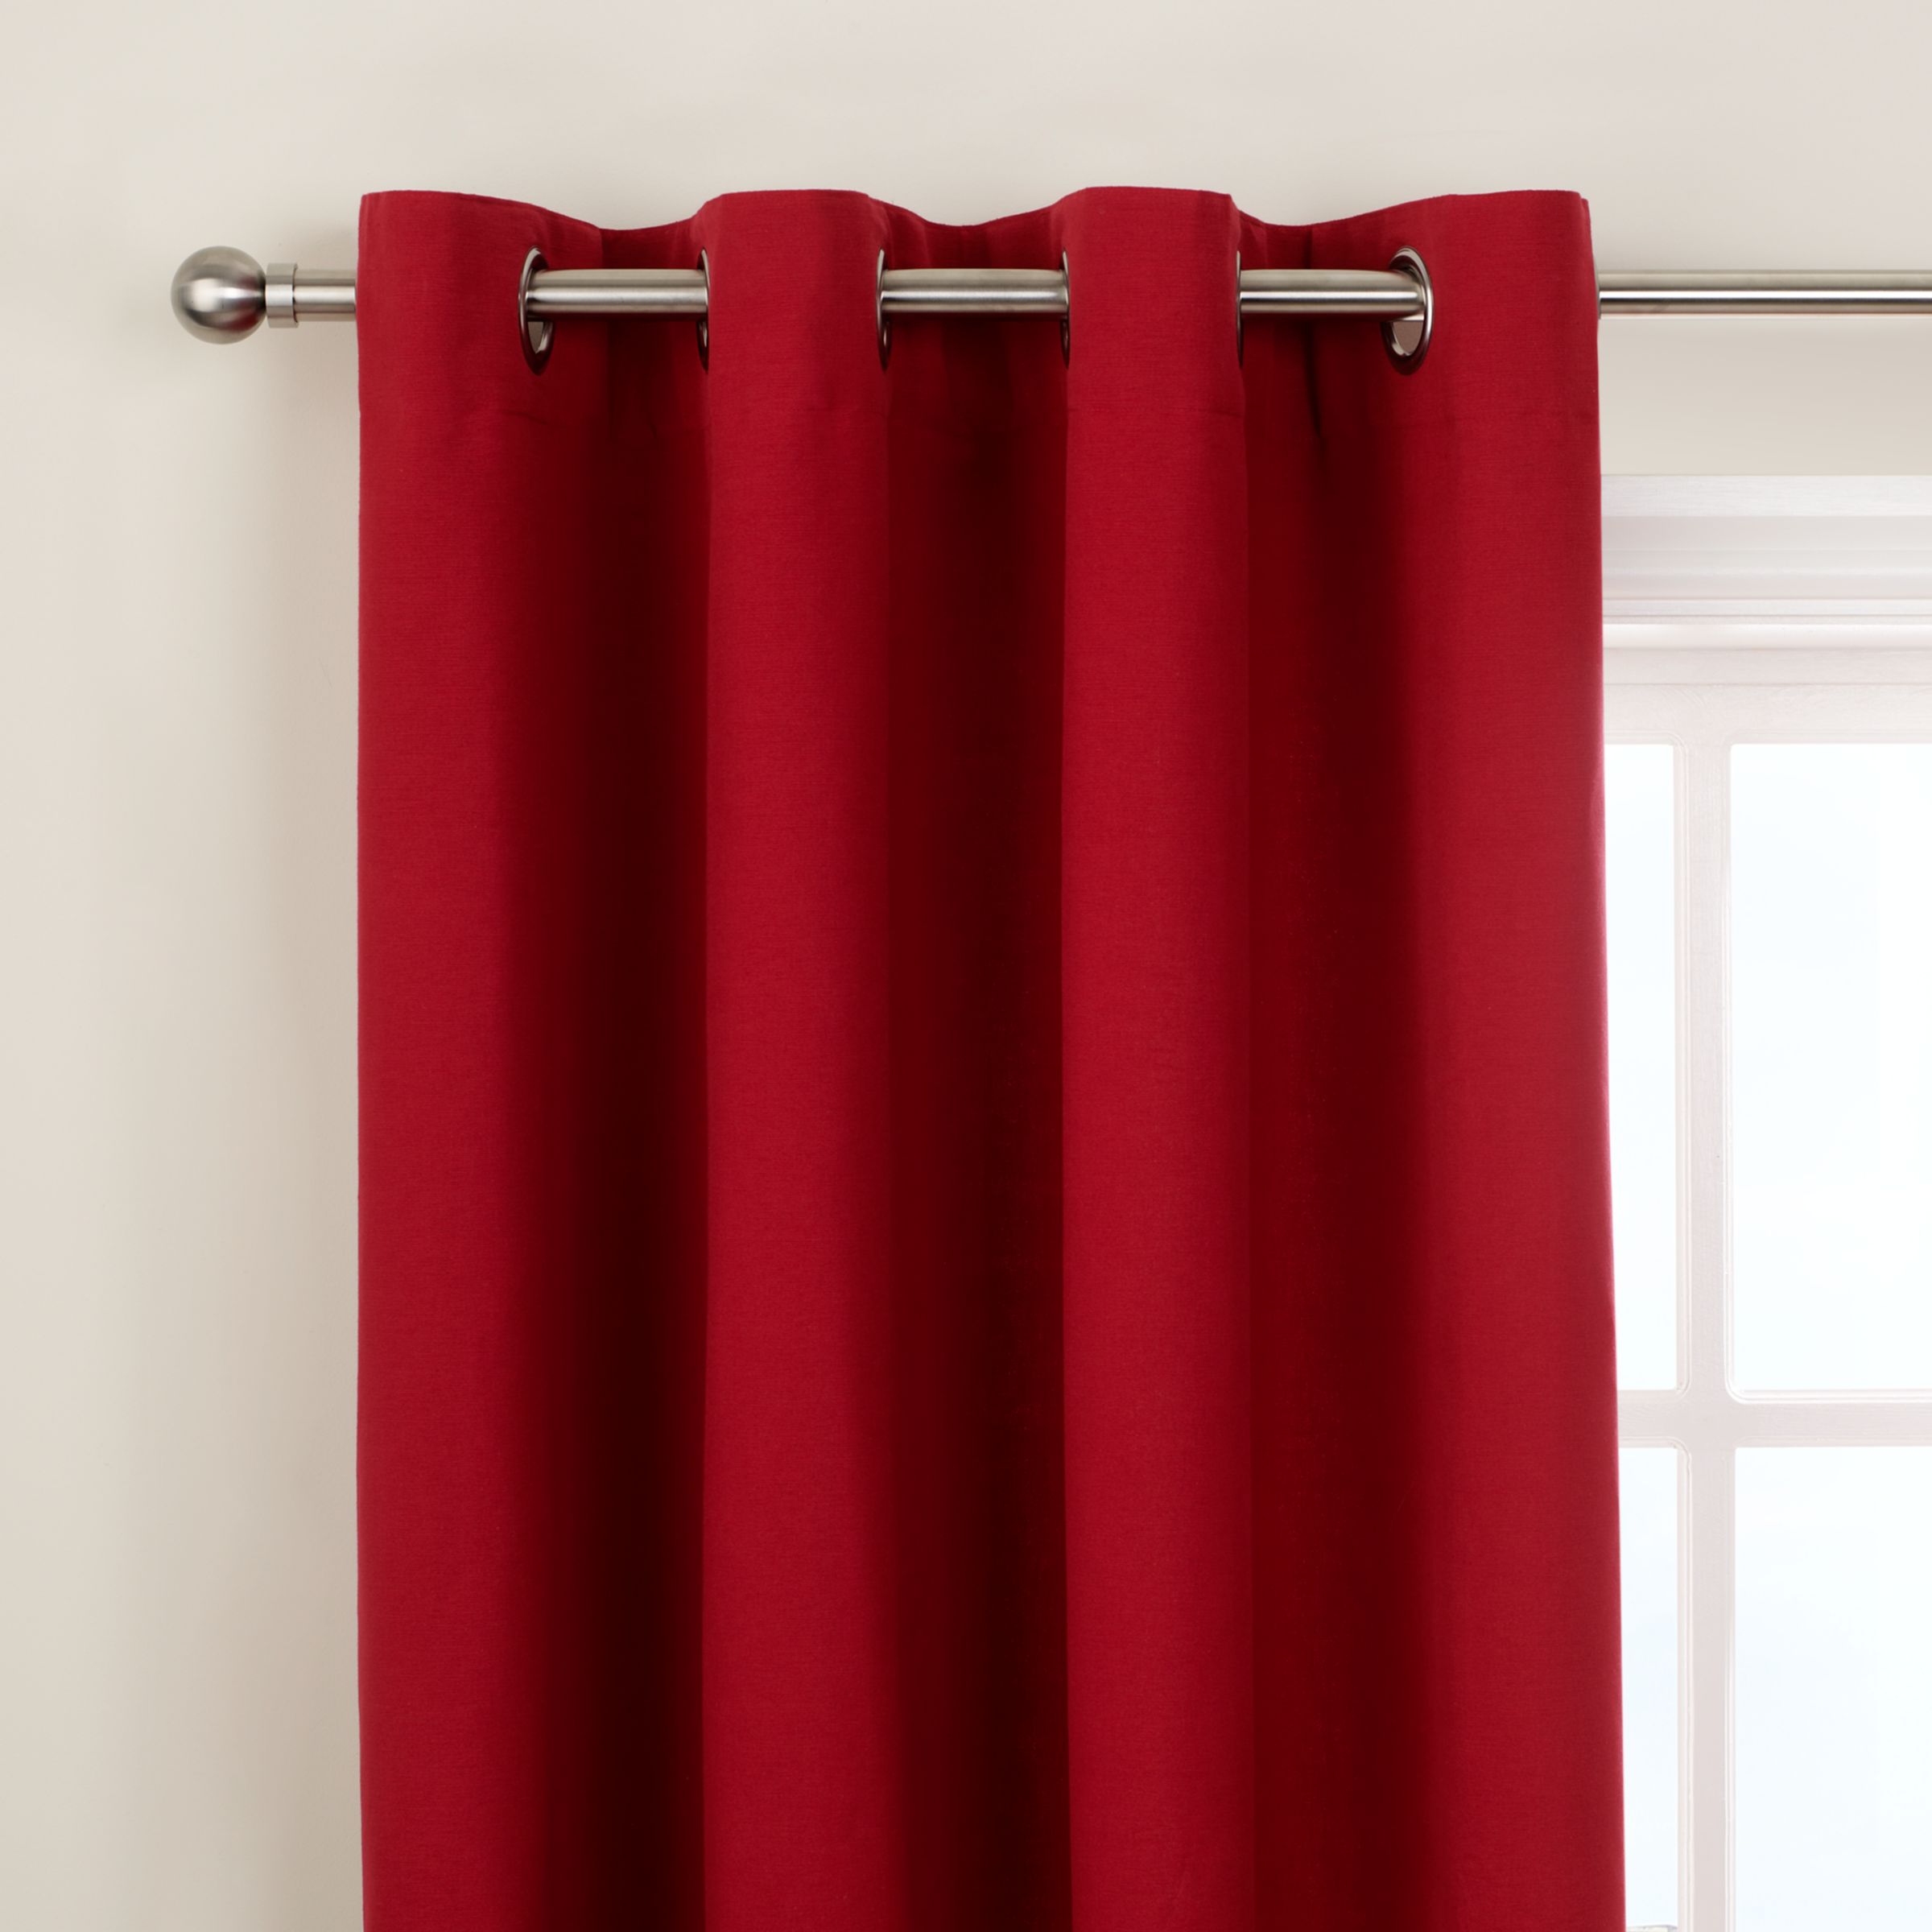 John Lewis Cotton Ribbed Eyelet Curtains, Lacquer